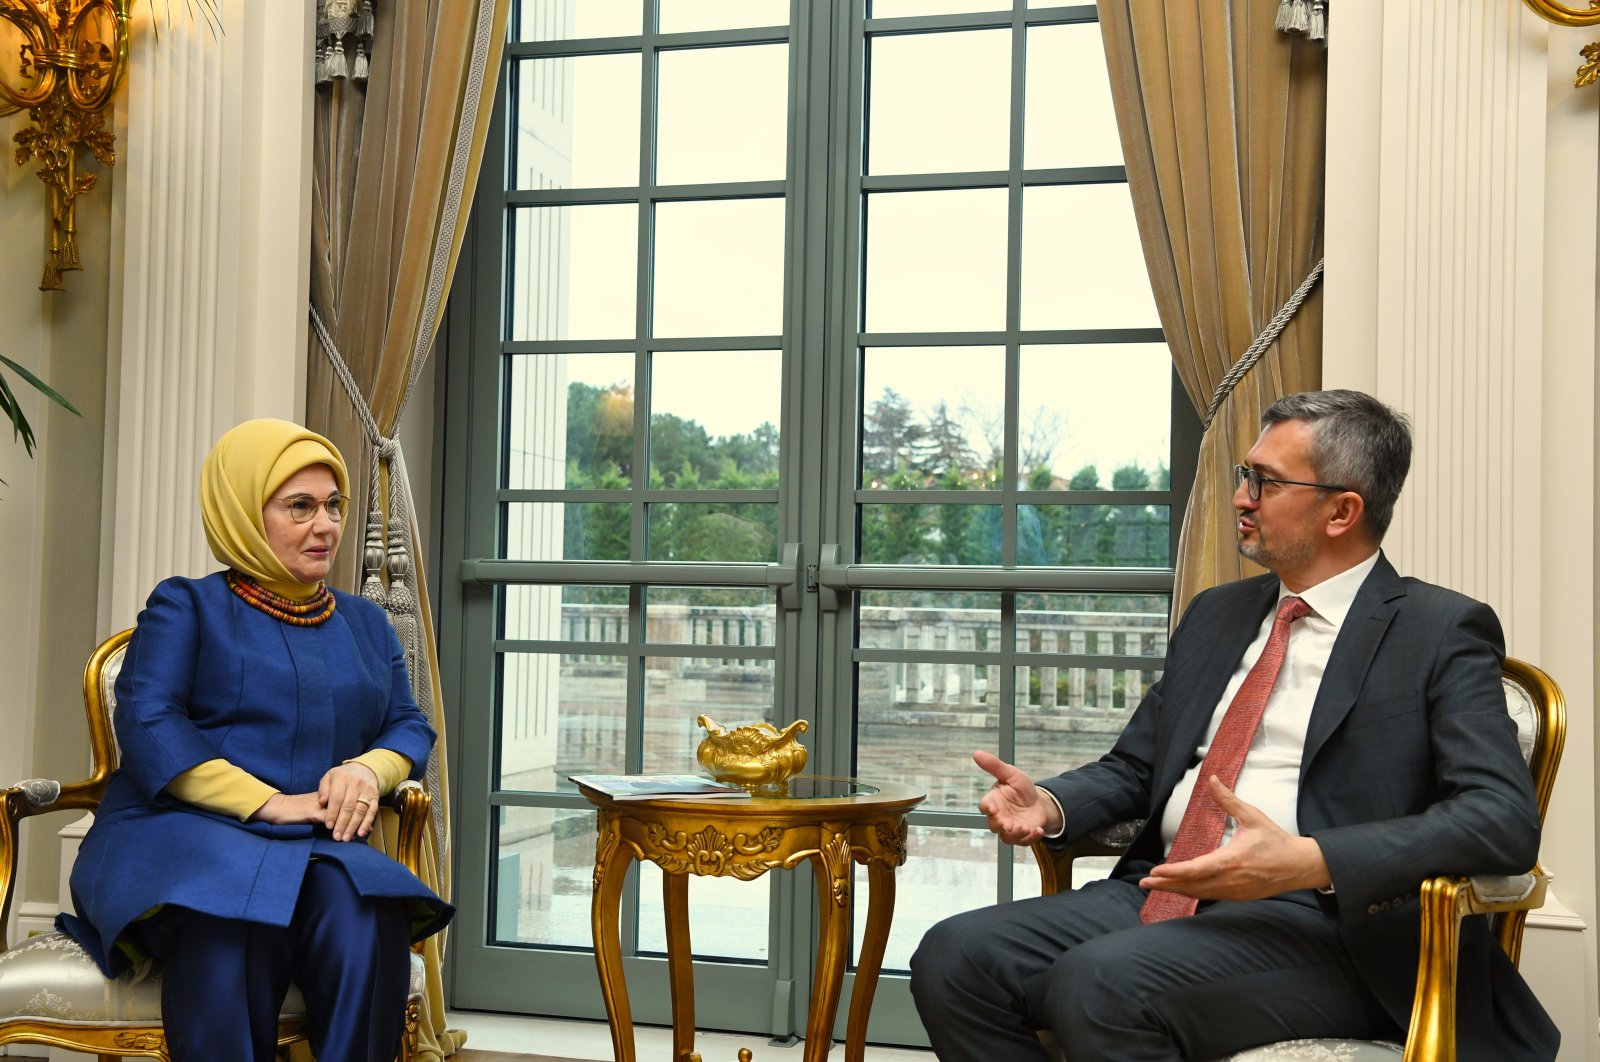 First lady Emine Erdoğan (L) speaks to the Foundation for Political, Economic and Social Research (SETA) General Coordinator Burhanettin Duran during an interview with Kriter, Ankara, Turkey, Nov. 25, 2021.